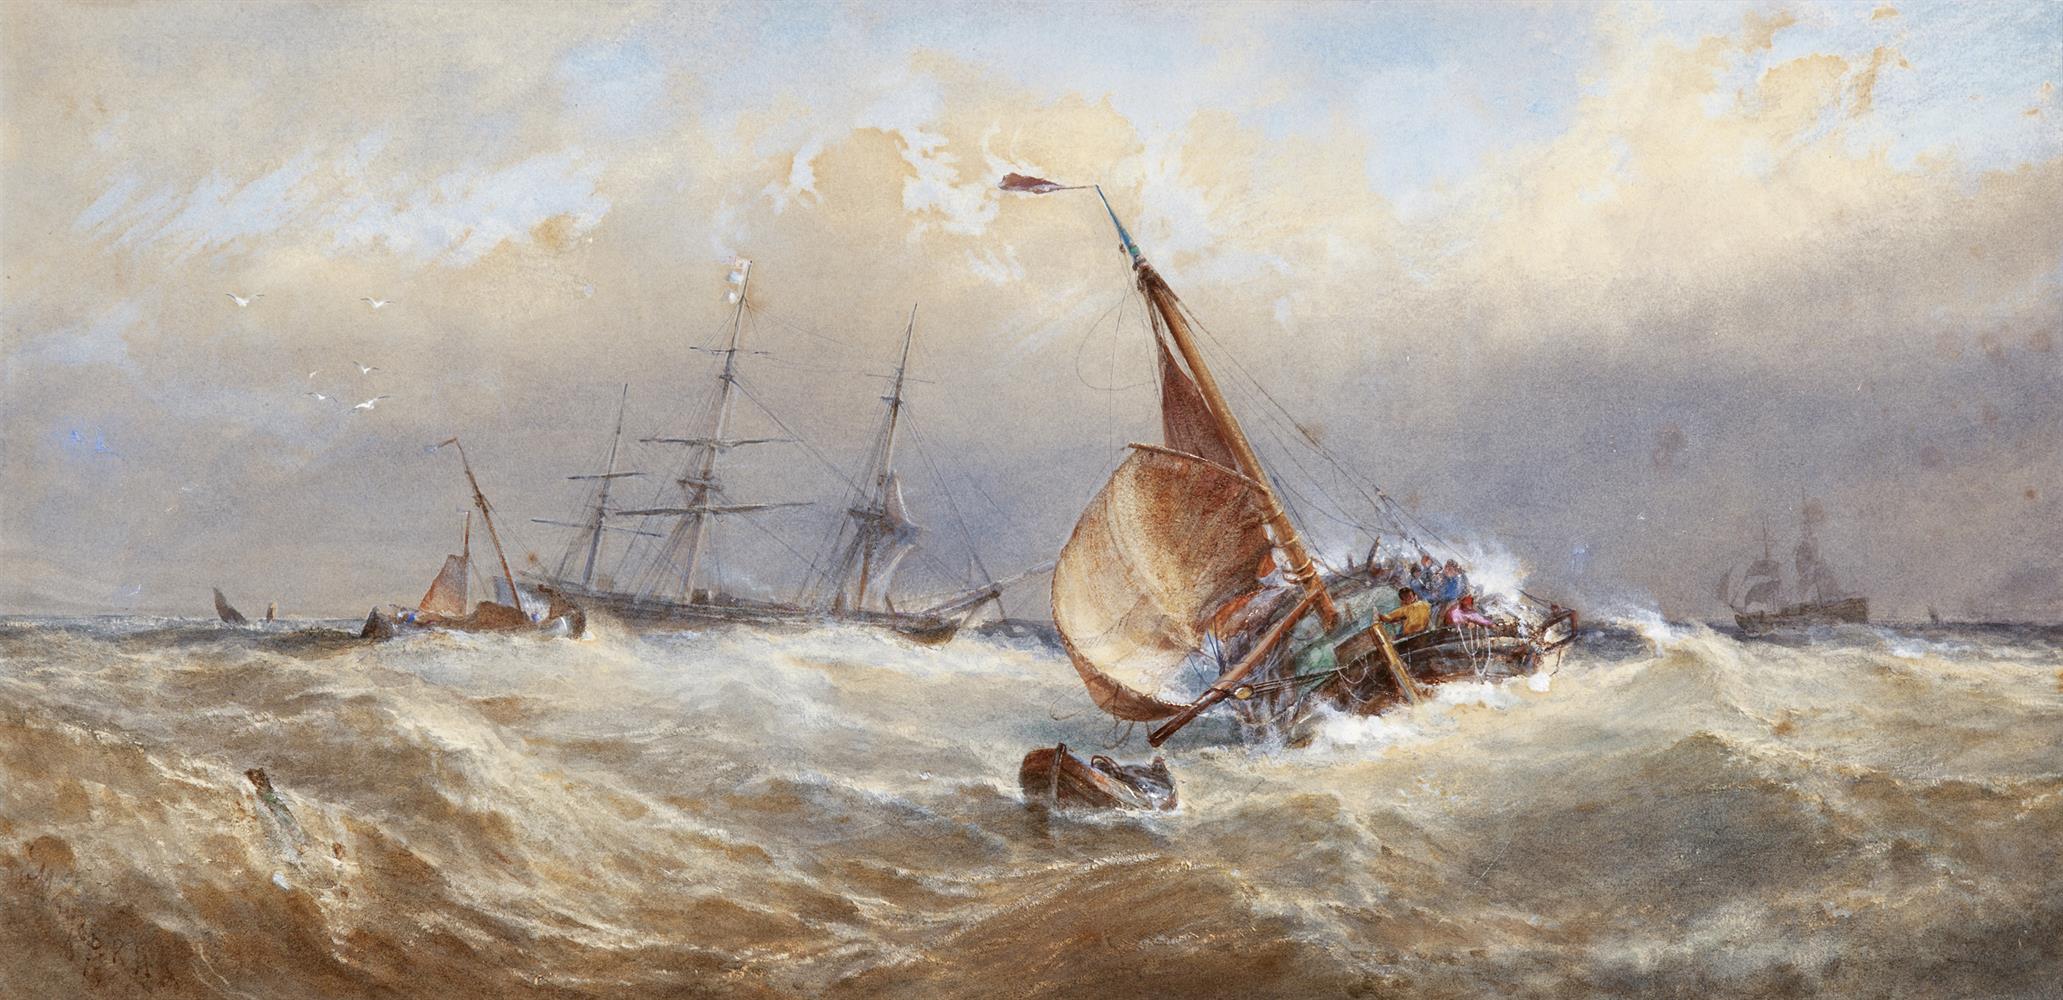 Edwin Hayes RHA RI ROI (1819-1904)Storm off the Coast with a Baroque in TroubleWatercolour, 37 x